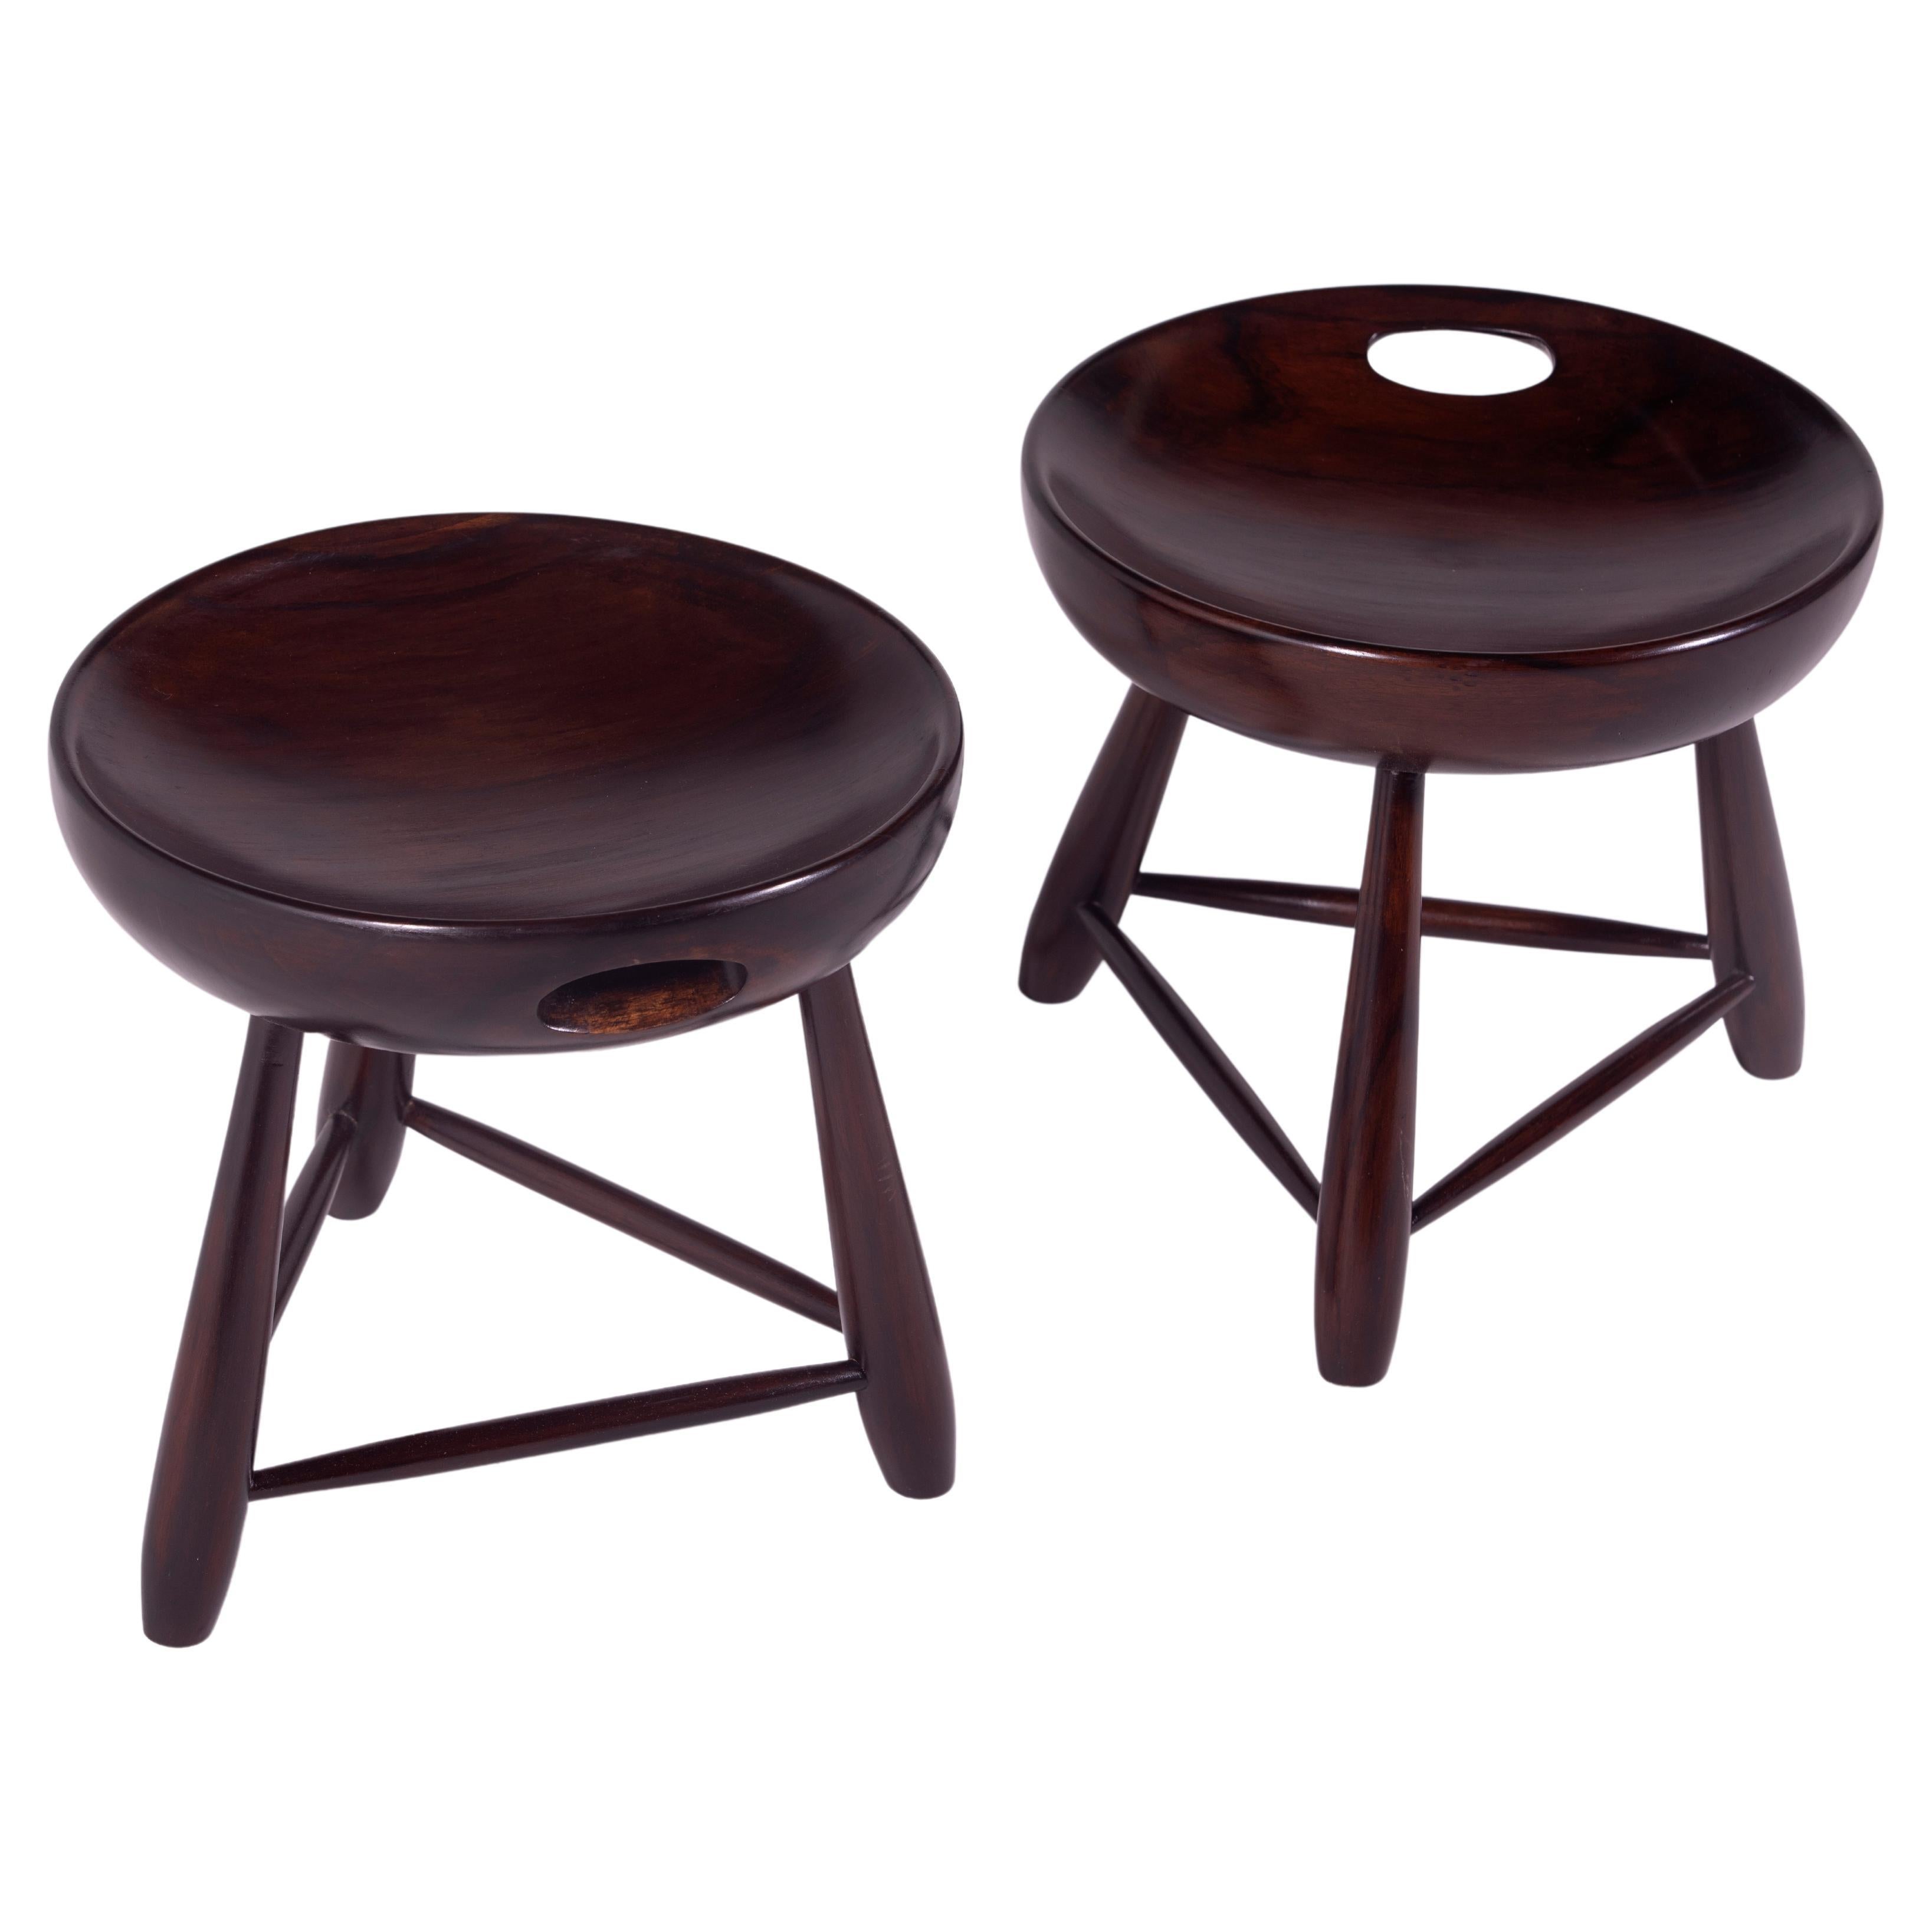 Mid-Century Modern "Mocho" Stool by Sergio Rodrigues, Brazil, 1960s For Sale